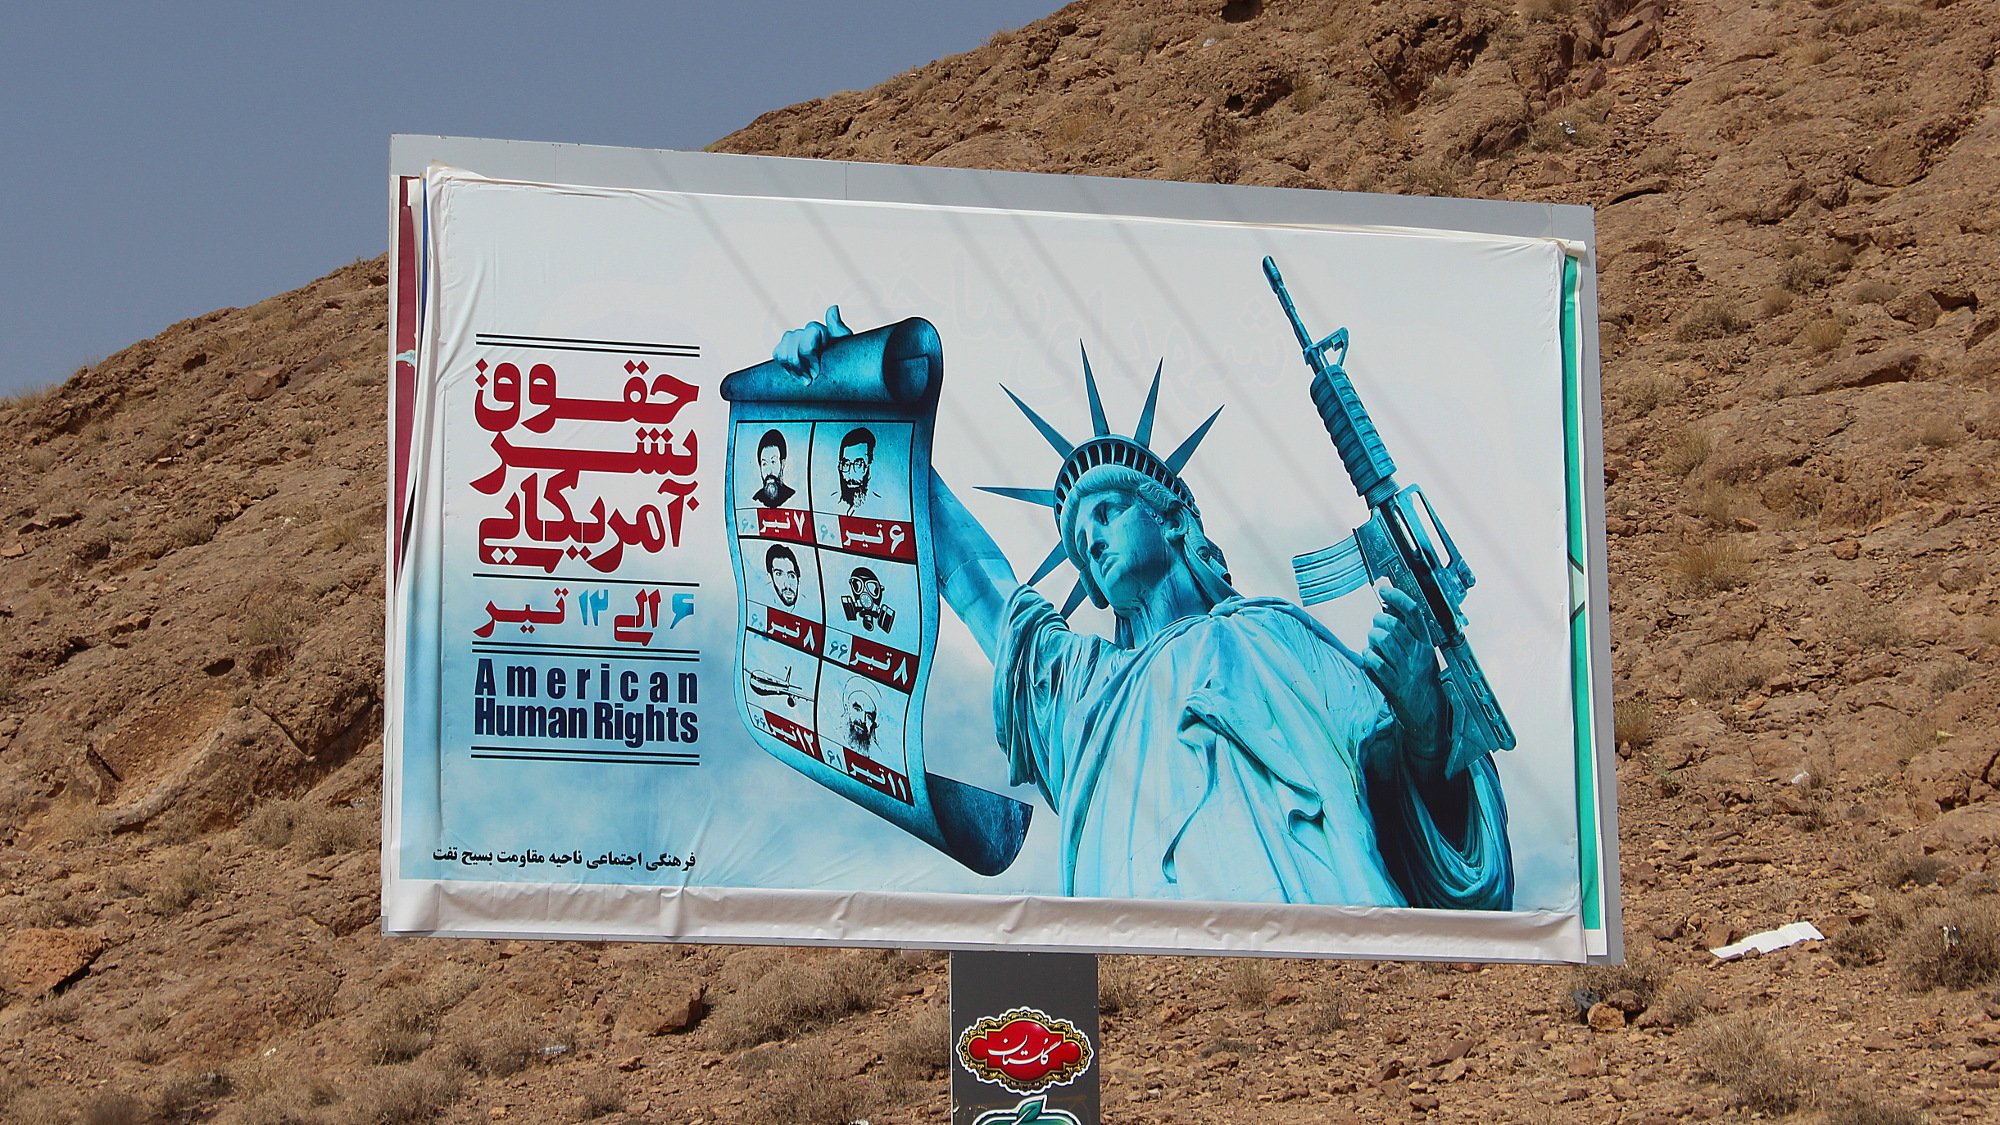 American Human Rights, an Iranian propaganda billboard on the side of the road. The Statue of Liberty holds a gun in one hand and pictures of the "nuclear martyrs" of Iran in other.